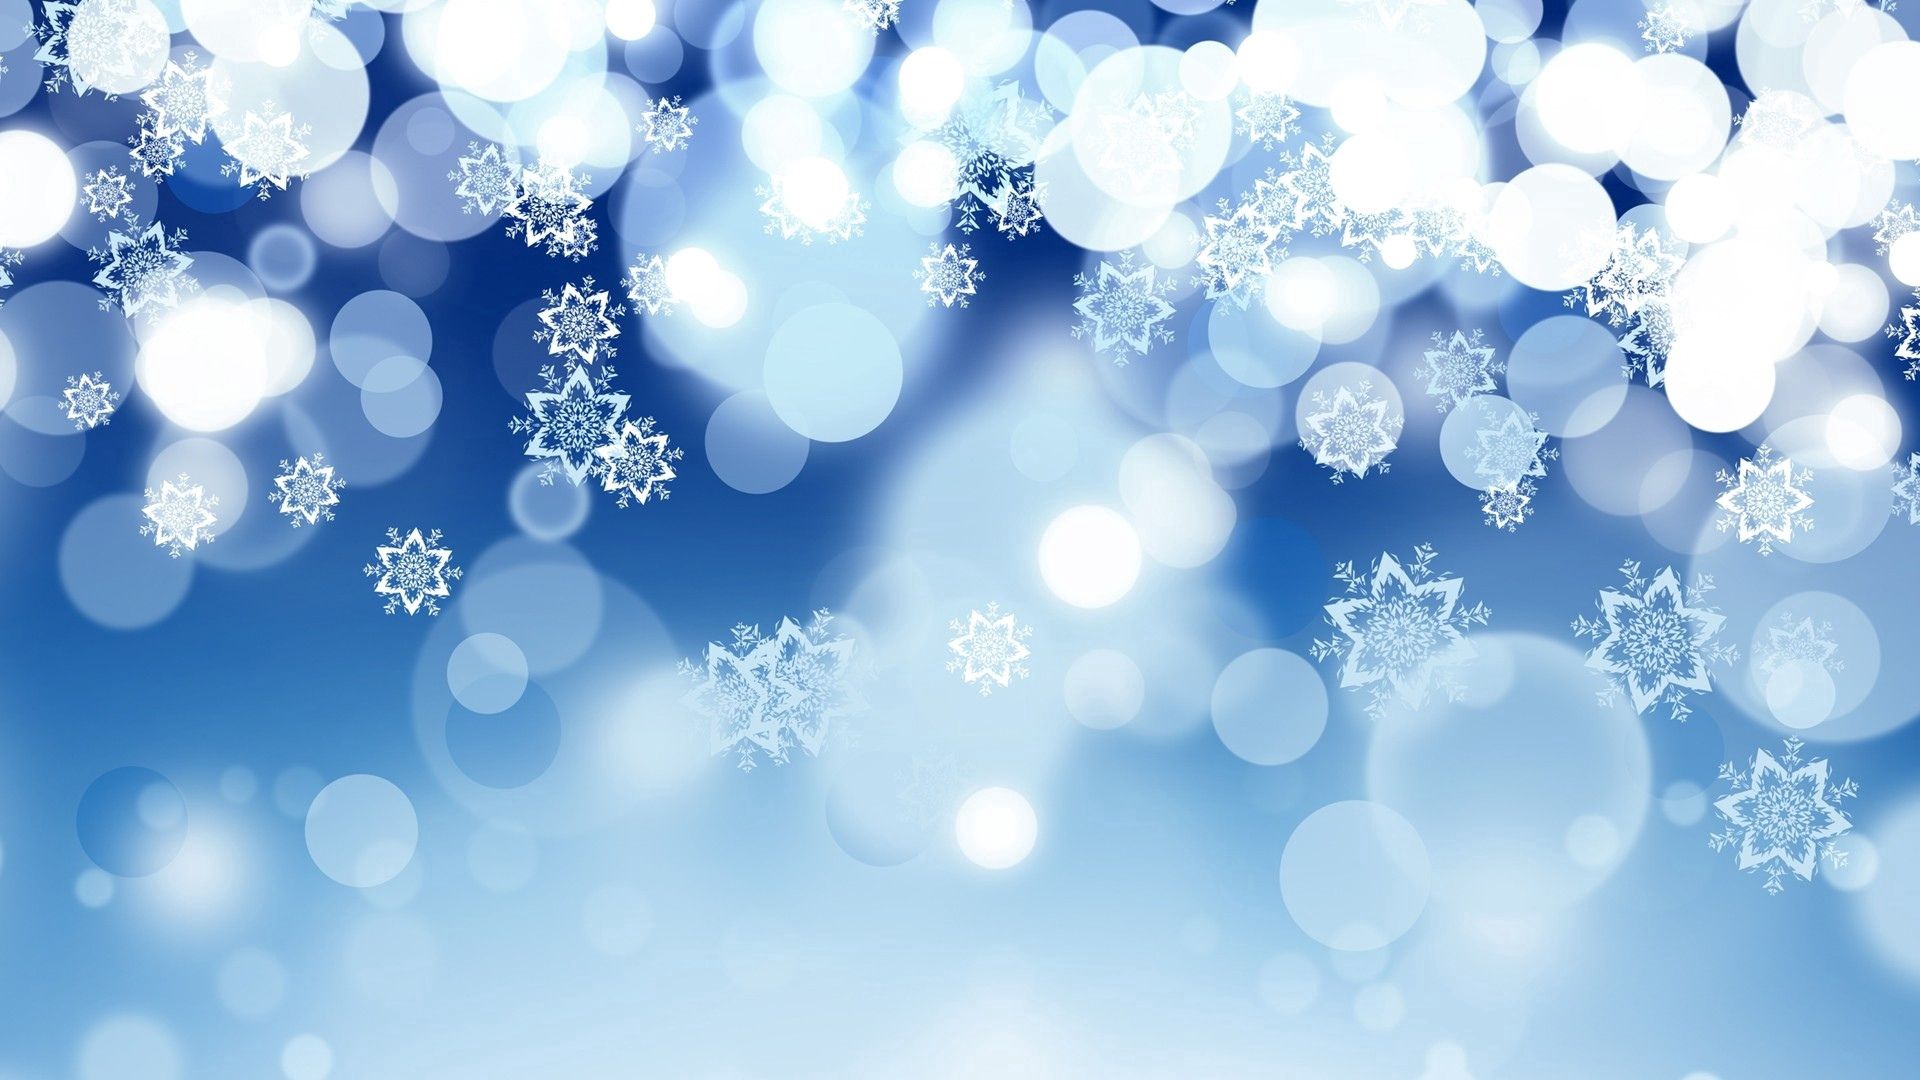 snowflakes, circles, abstract, background, stars, glare High Definition image